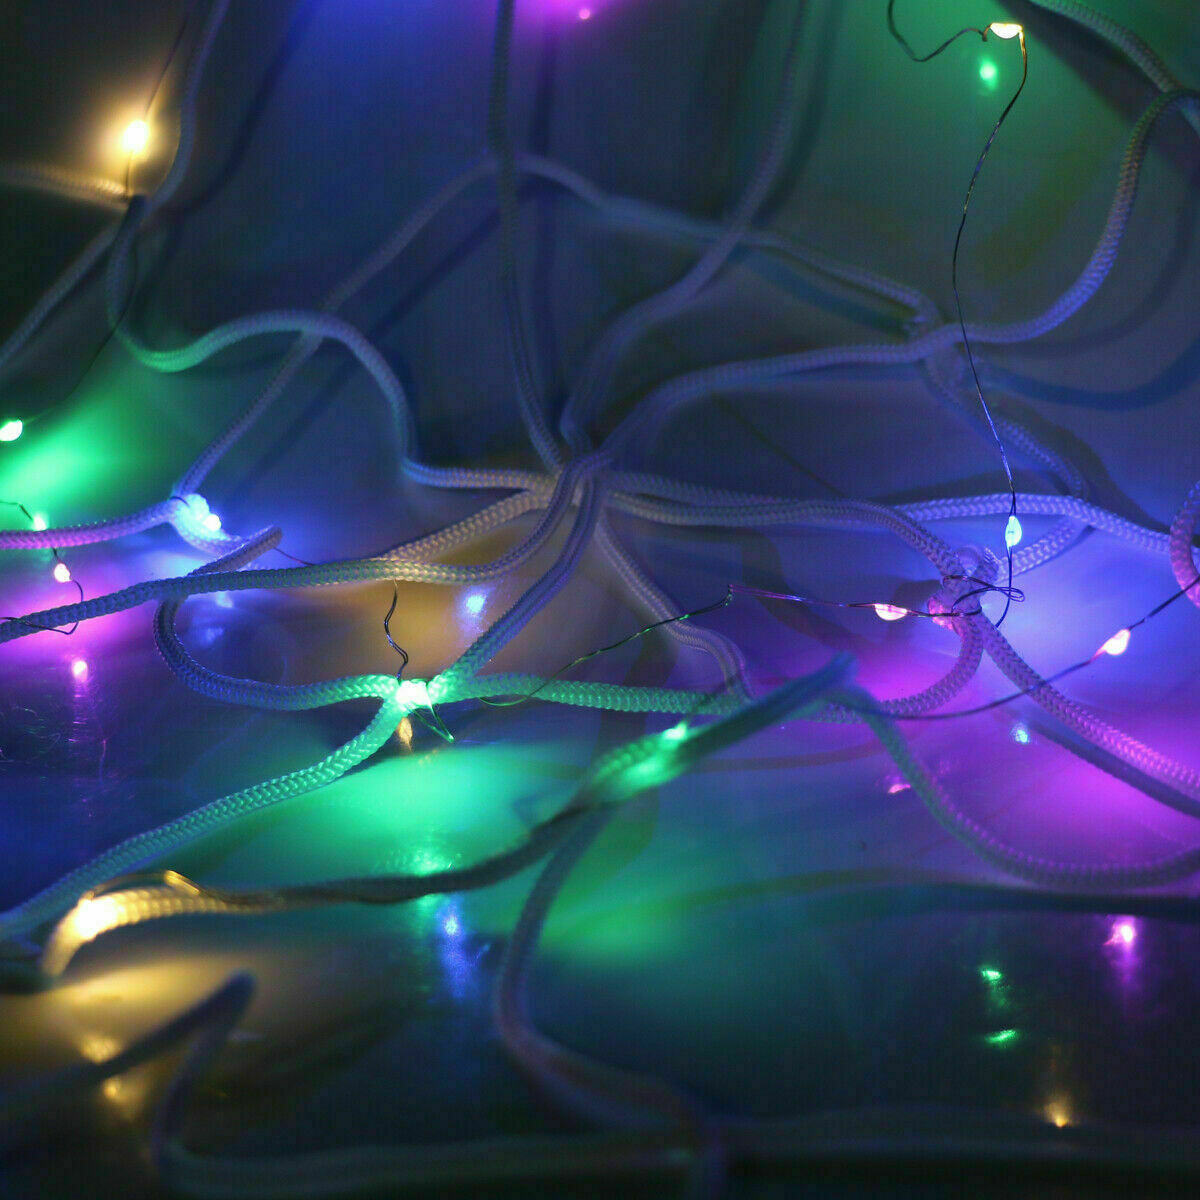 LED Spider Web Halloween Props Party Light Up Cobweb Outdoor Lighting Decoration